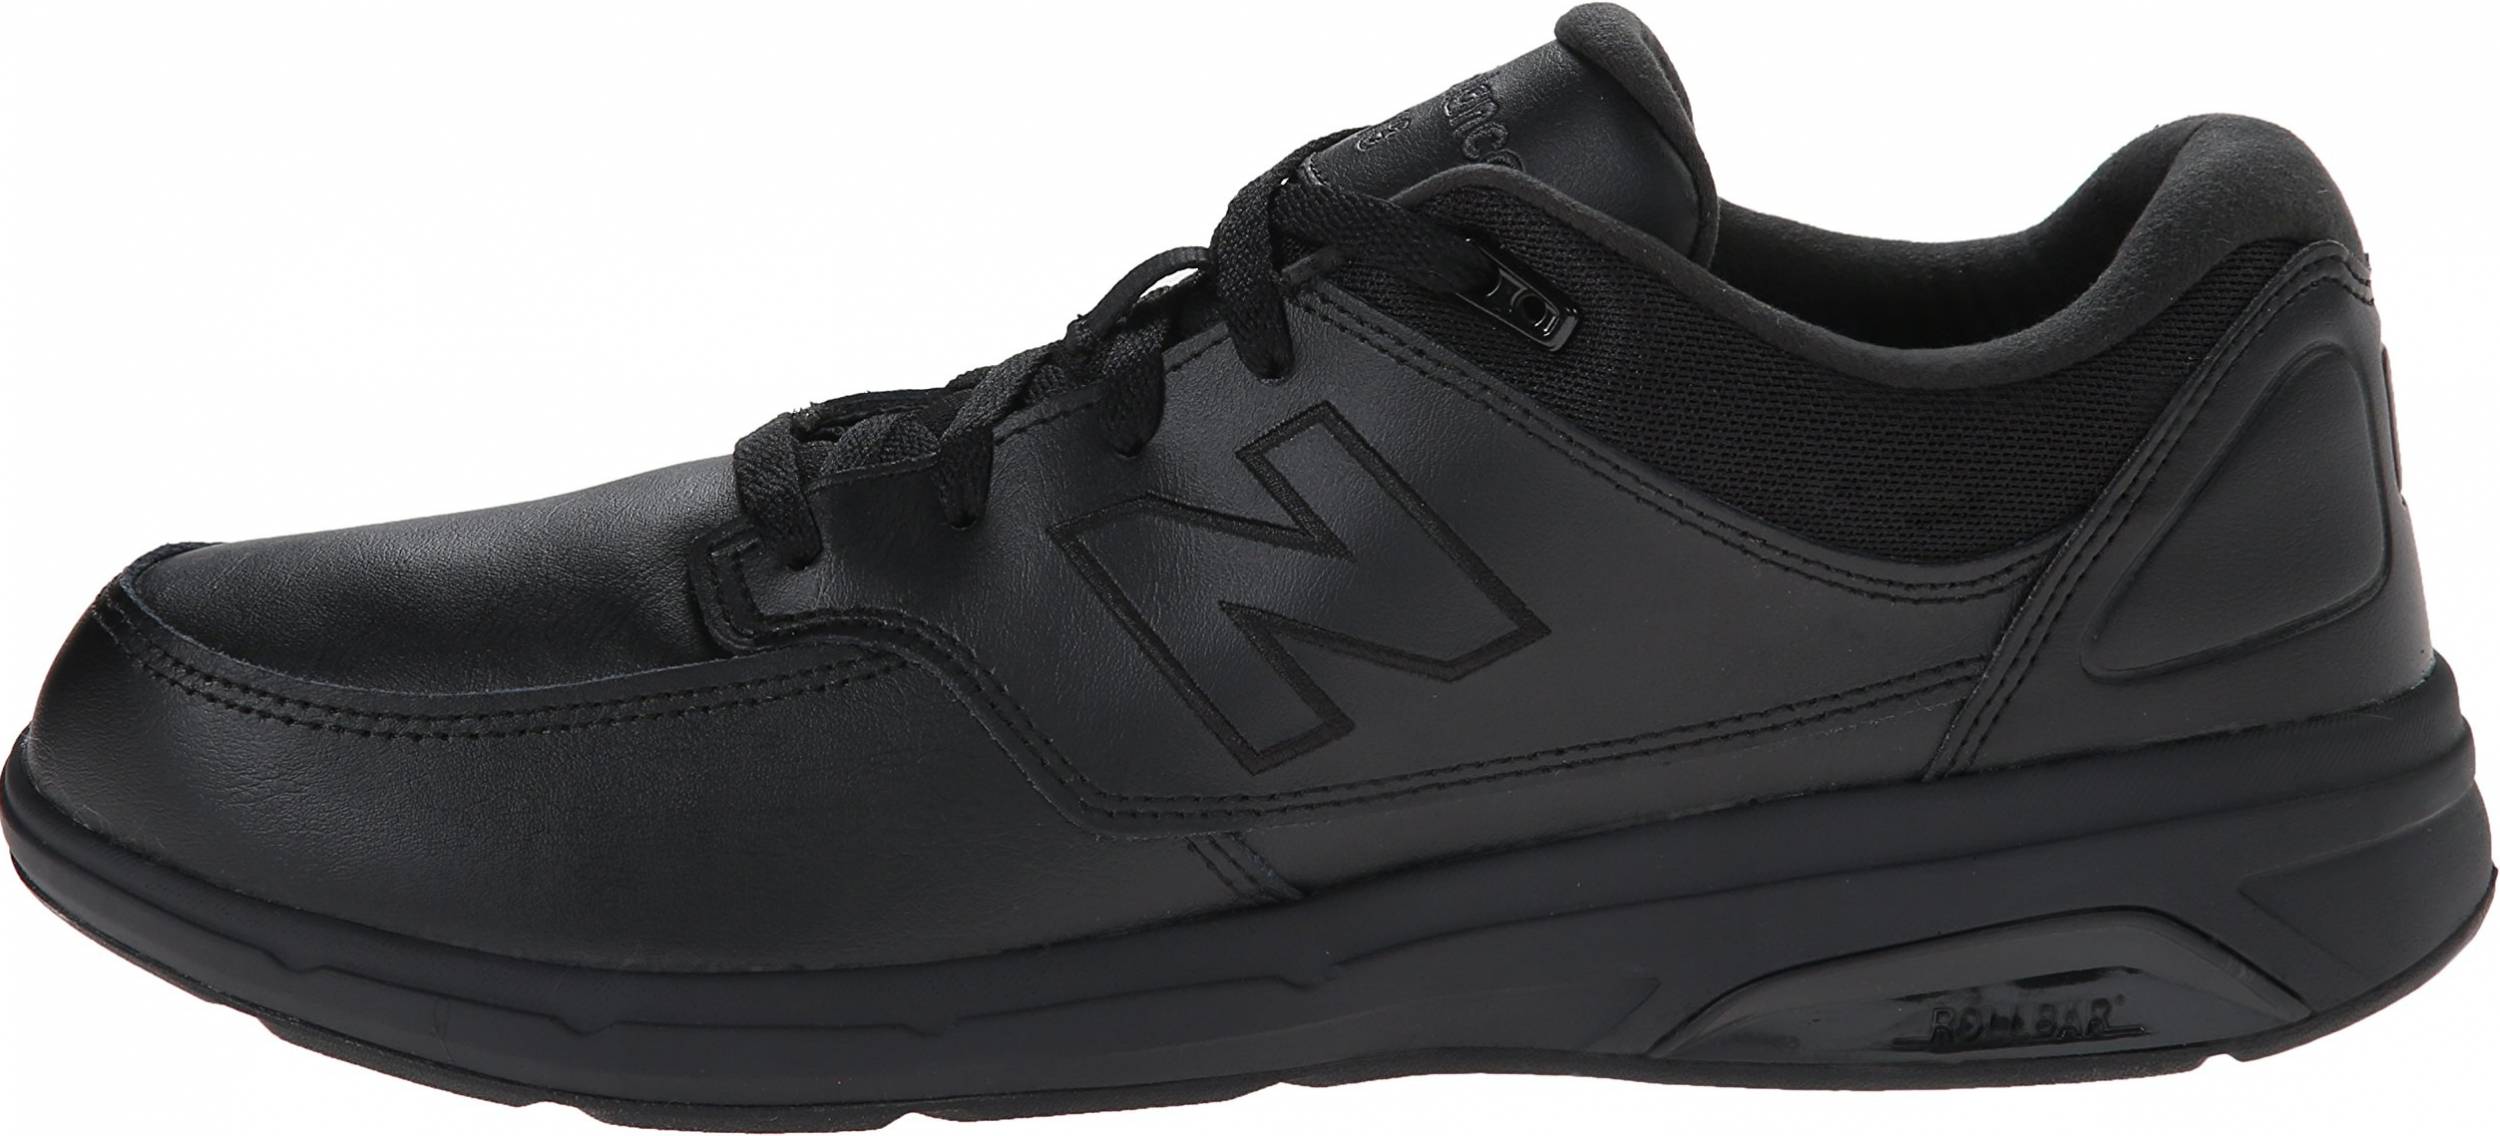 Save 46% on Narrow Walking Shoes (17 